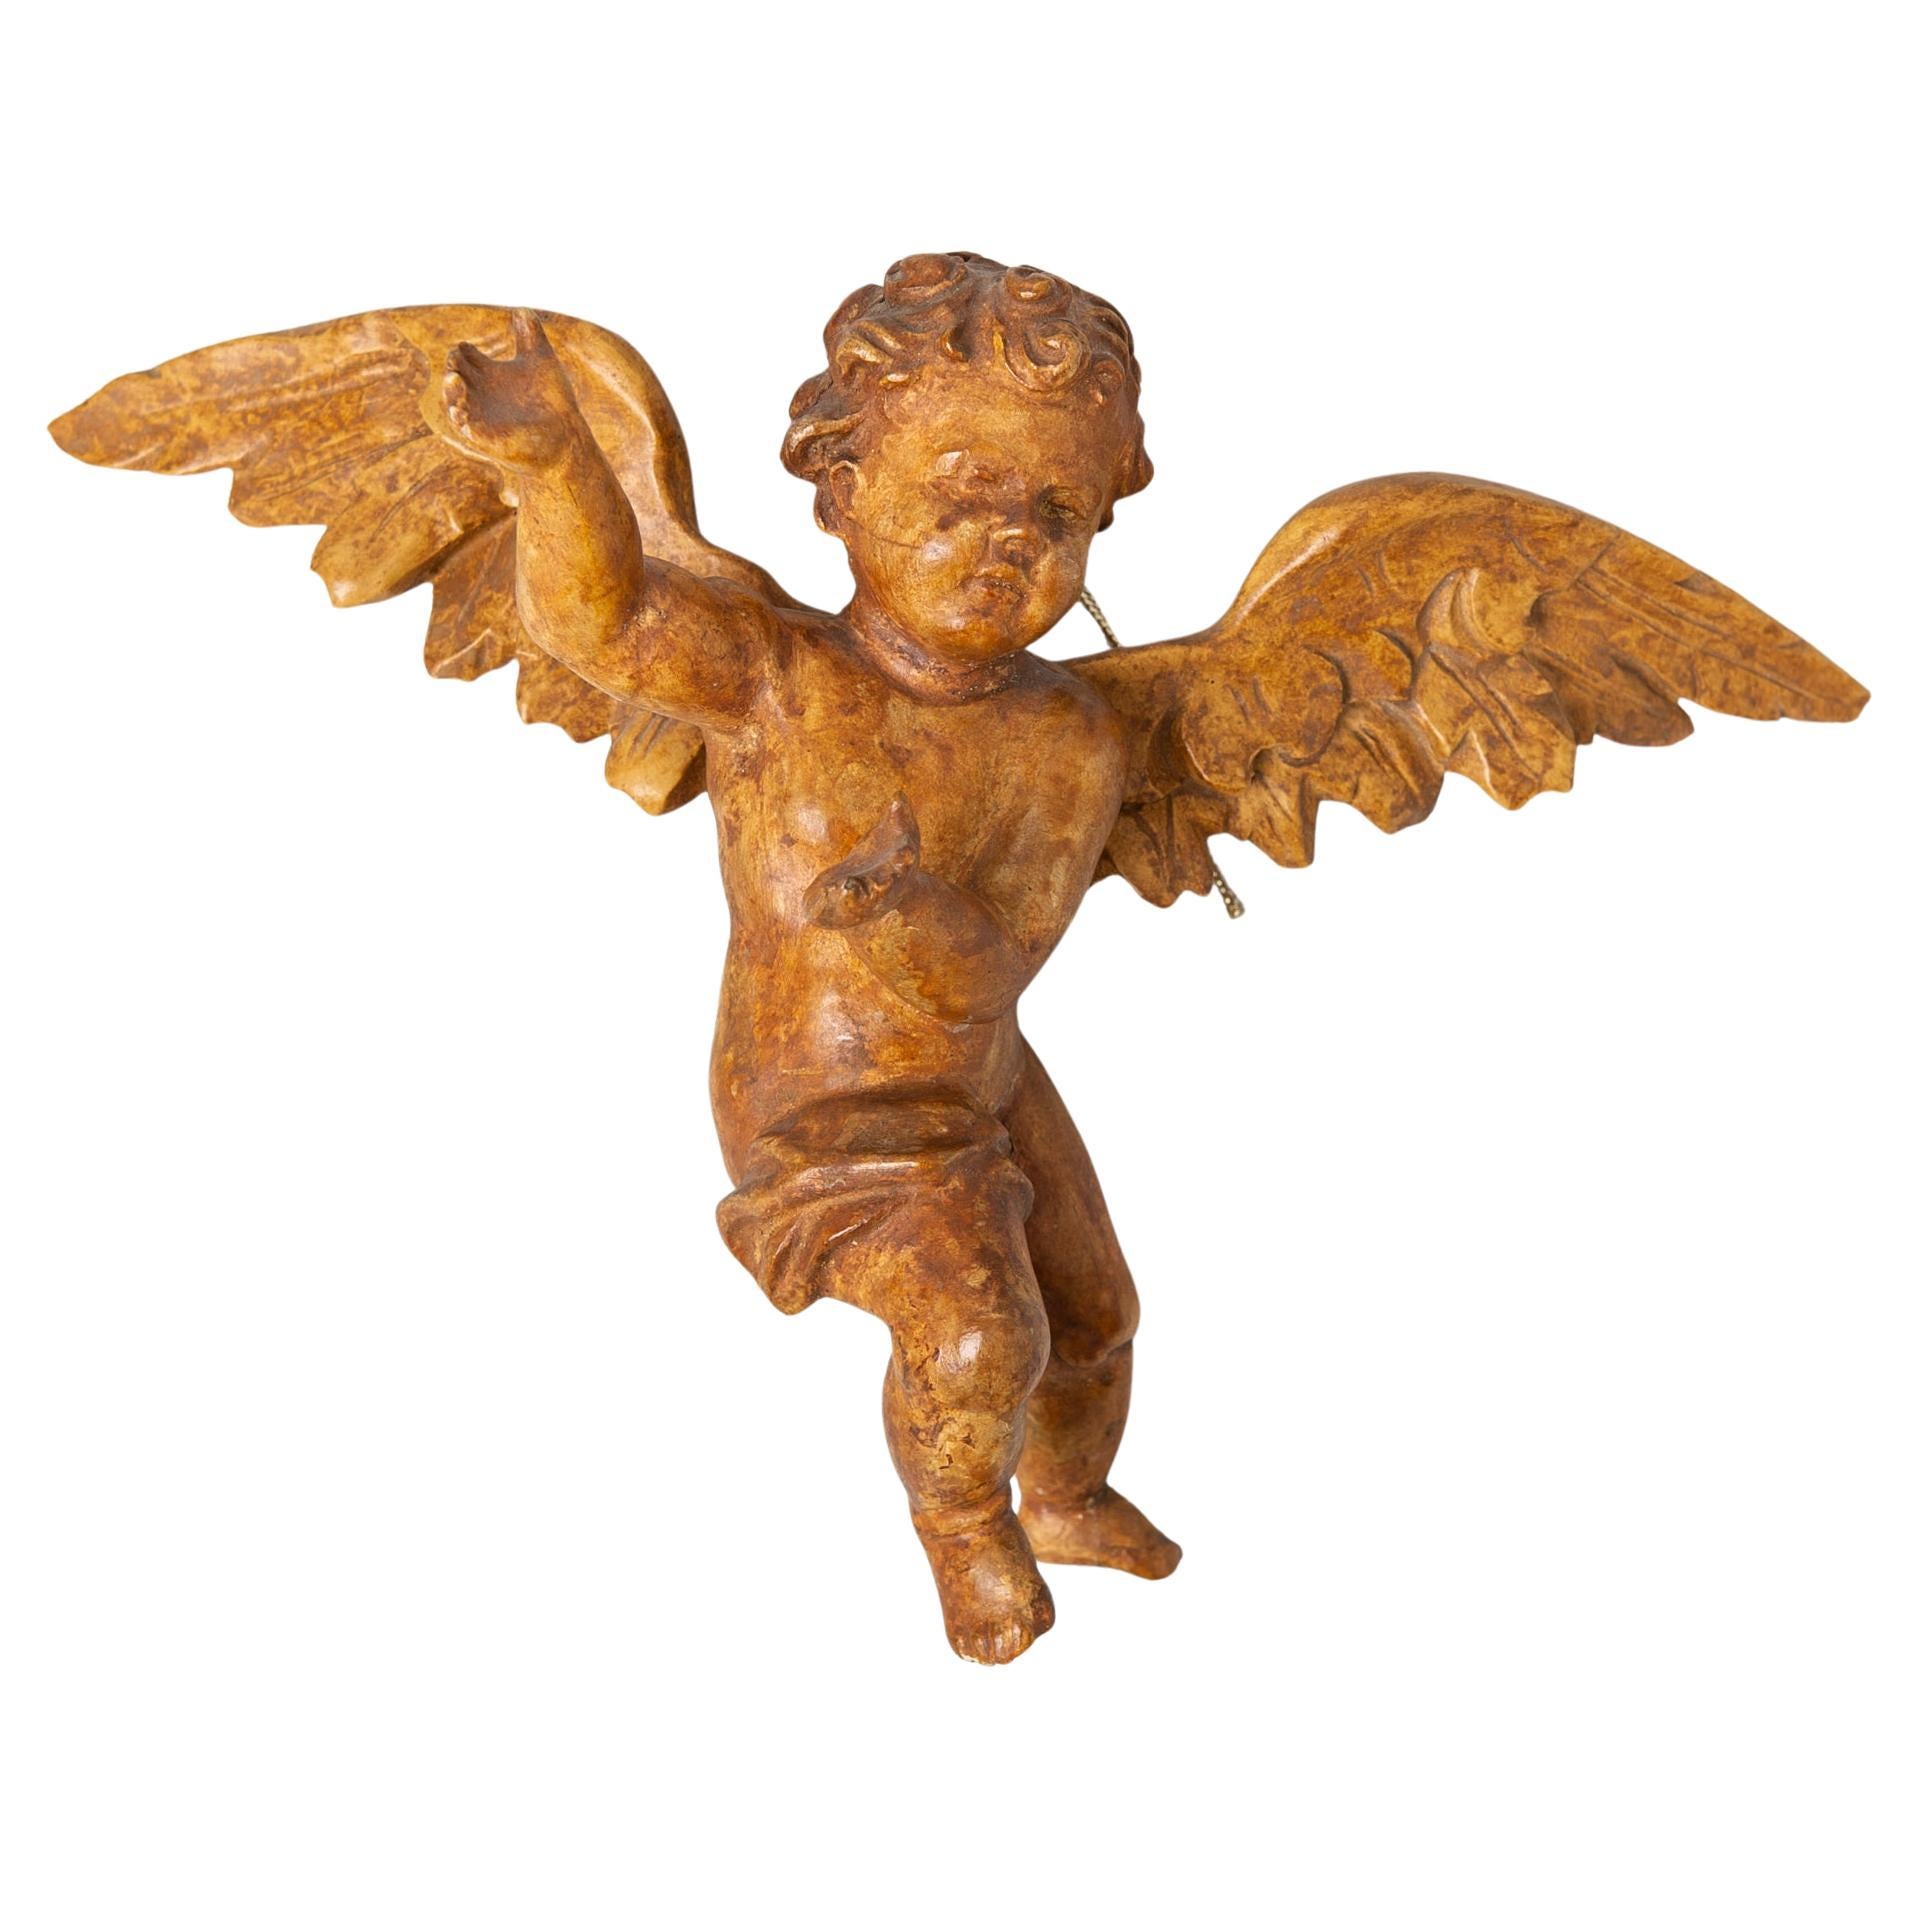 Antique wooden angel from the mid 1800's, with traces of lacquer but no trace of gilding: I could gild it, but I prefer it as it is.
To hang anywhere You want to see it, for good luck and protection.